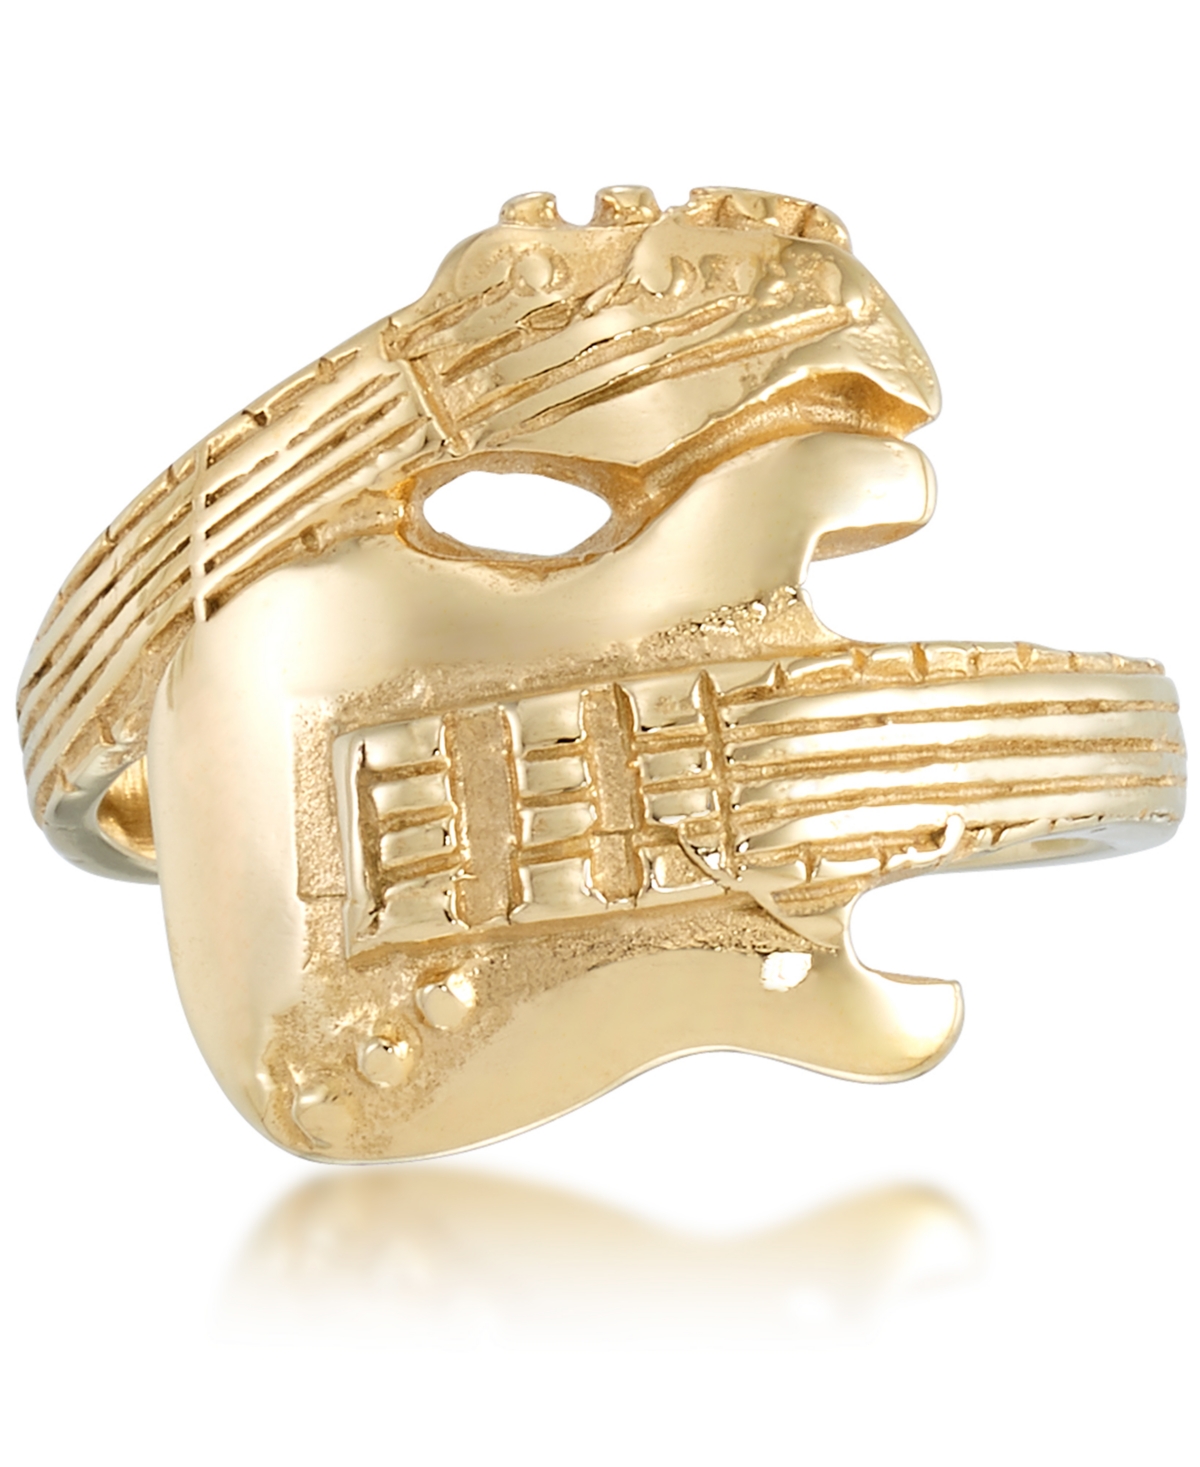 Men's Guitar Ring in Yellow Ion-Plated Stainless Steel - Gold-Tone